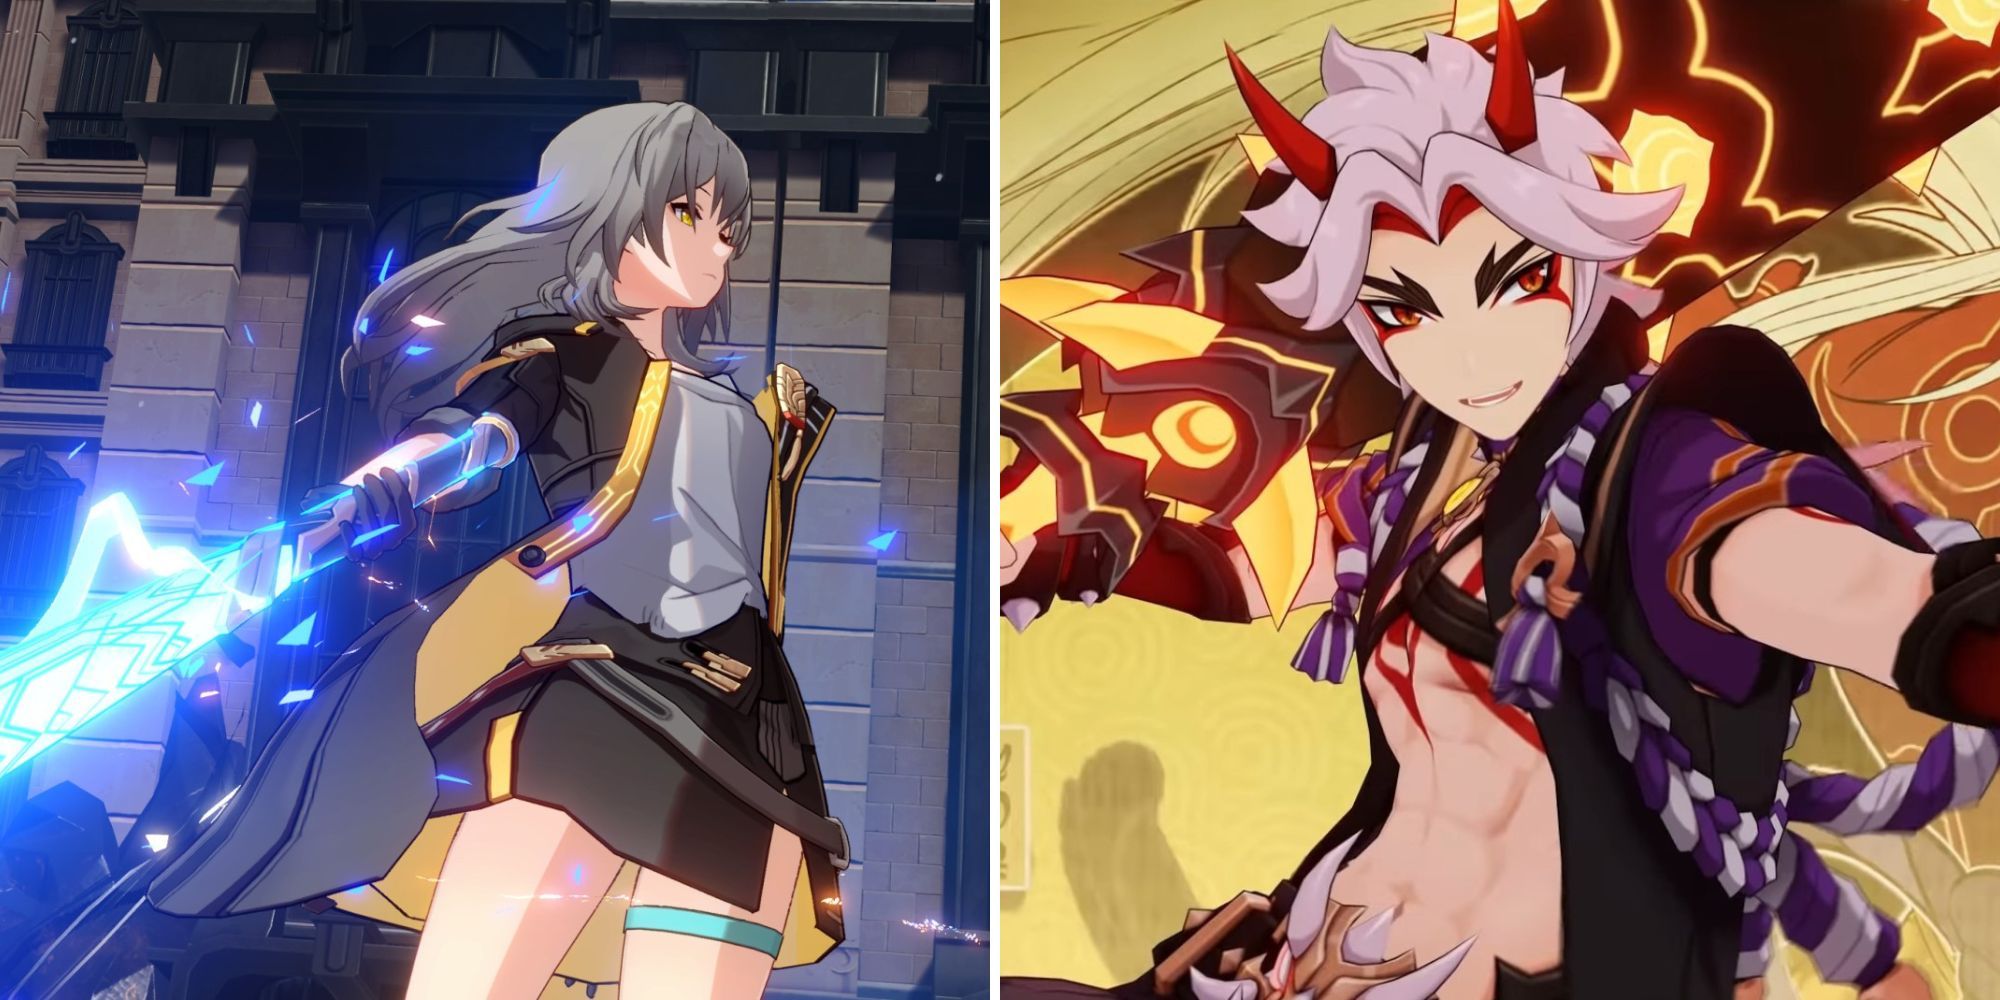 Honkai: Physical Trailblazer Ultimate from Star Rail and Itto's Burst from Genshin Impact